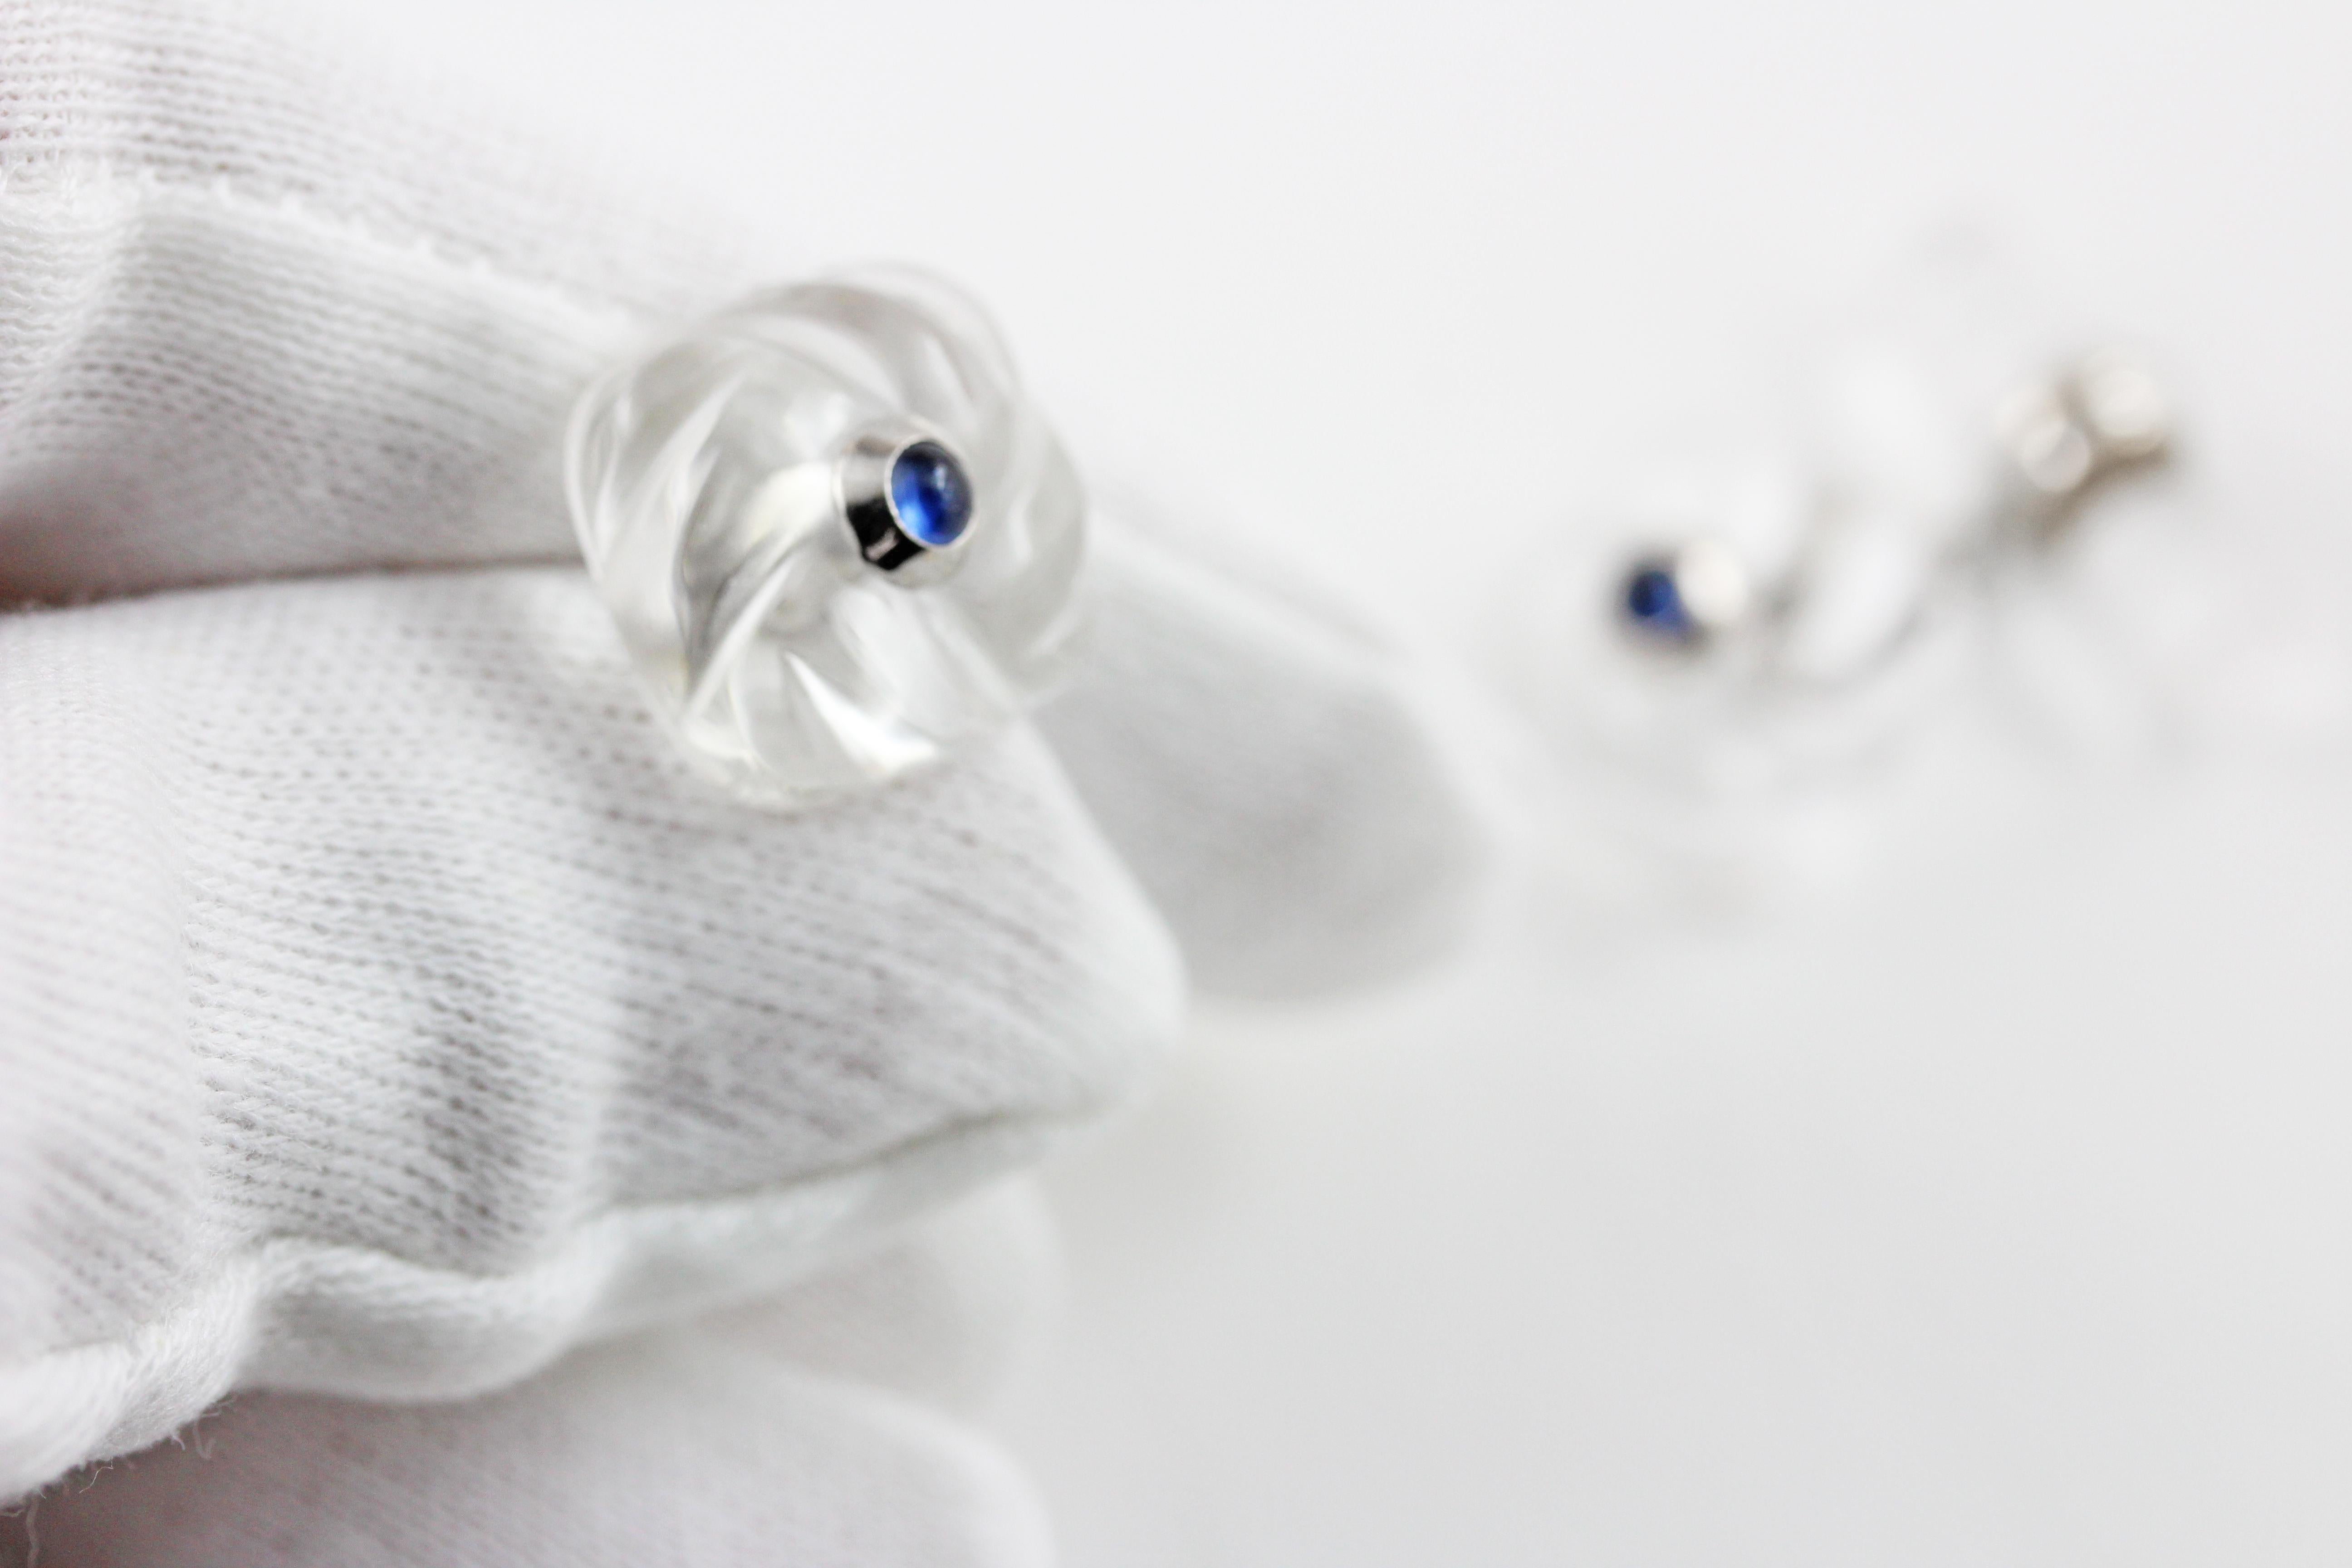 These classic cufflinks are made of rock crystal and feature a front face shaped as a square with a striking texture that mimics an interwoven fabric. The squares are adorned in the center with cabochon sapphires. The toggle is a simple cylinder